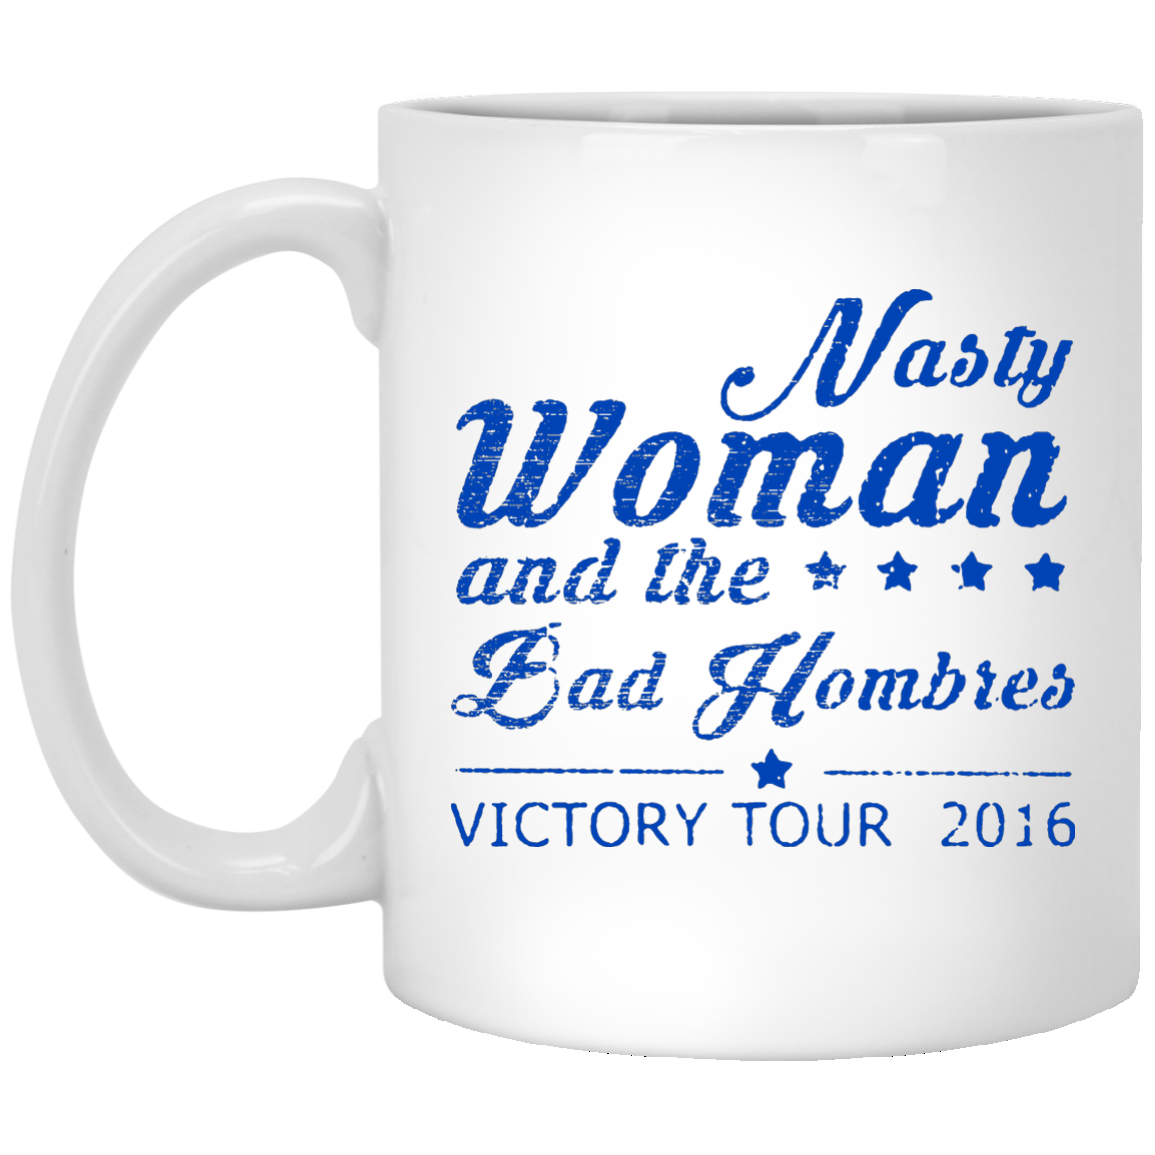 Nasty Woman and the Bad Hombres Mugs